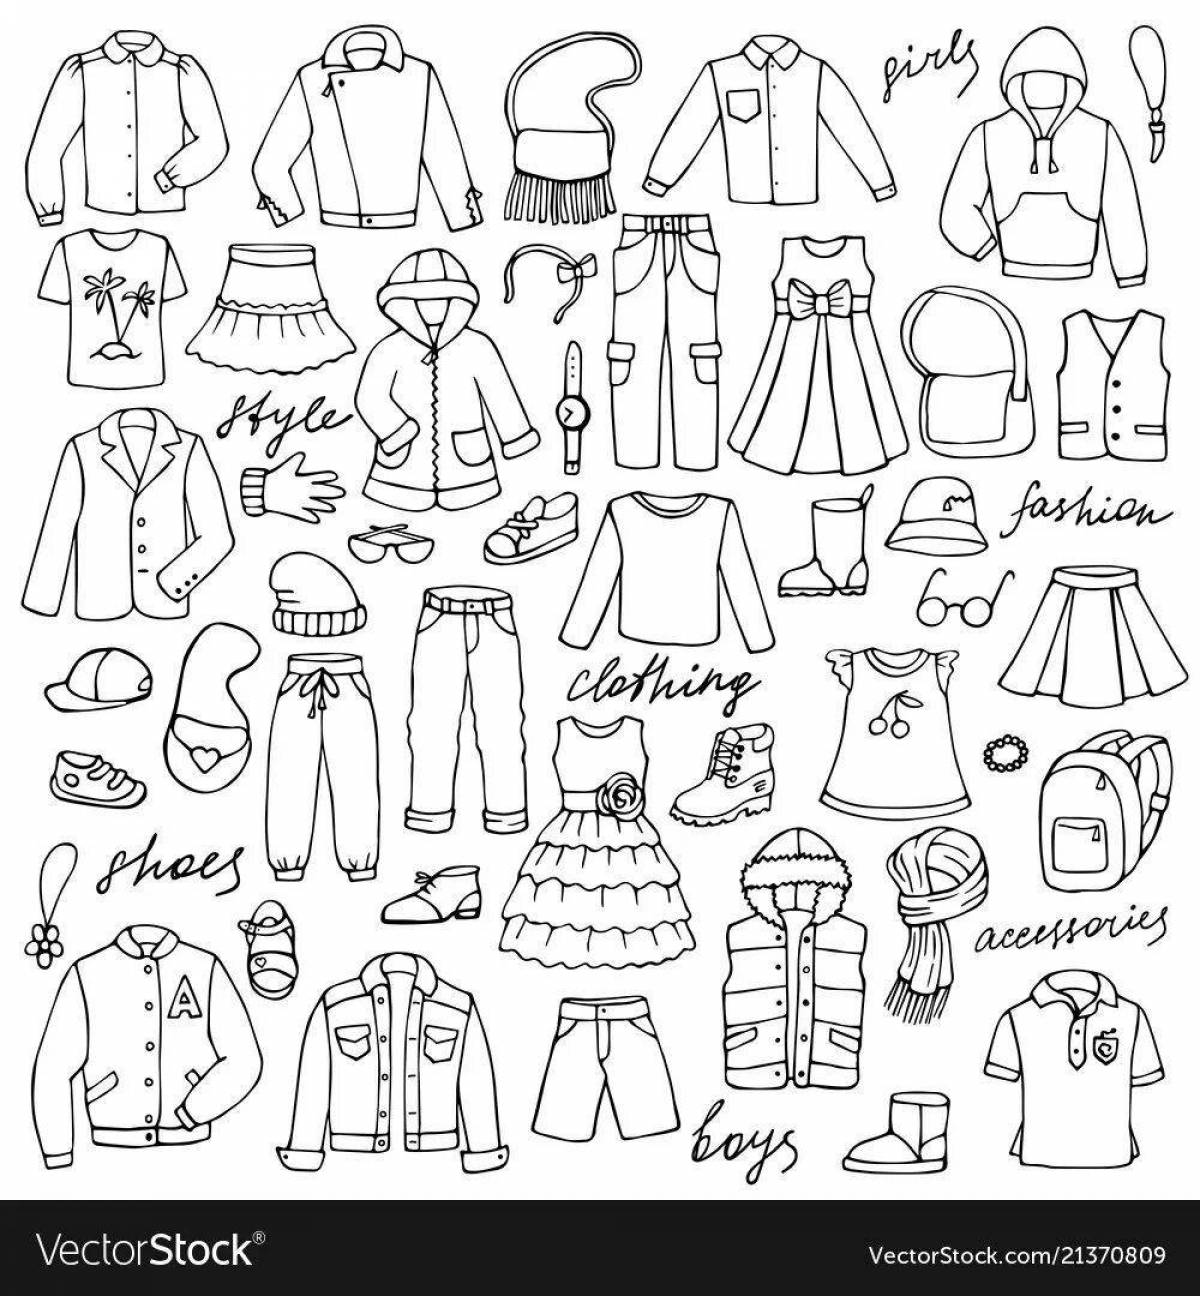 Charming home clothes coloring book